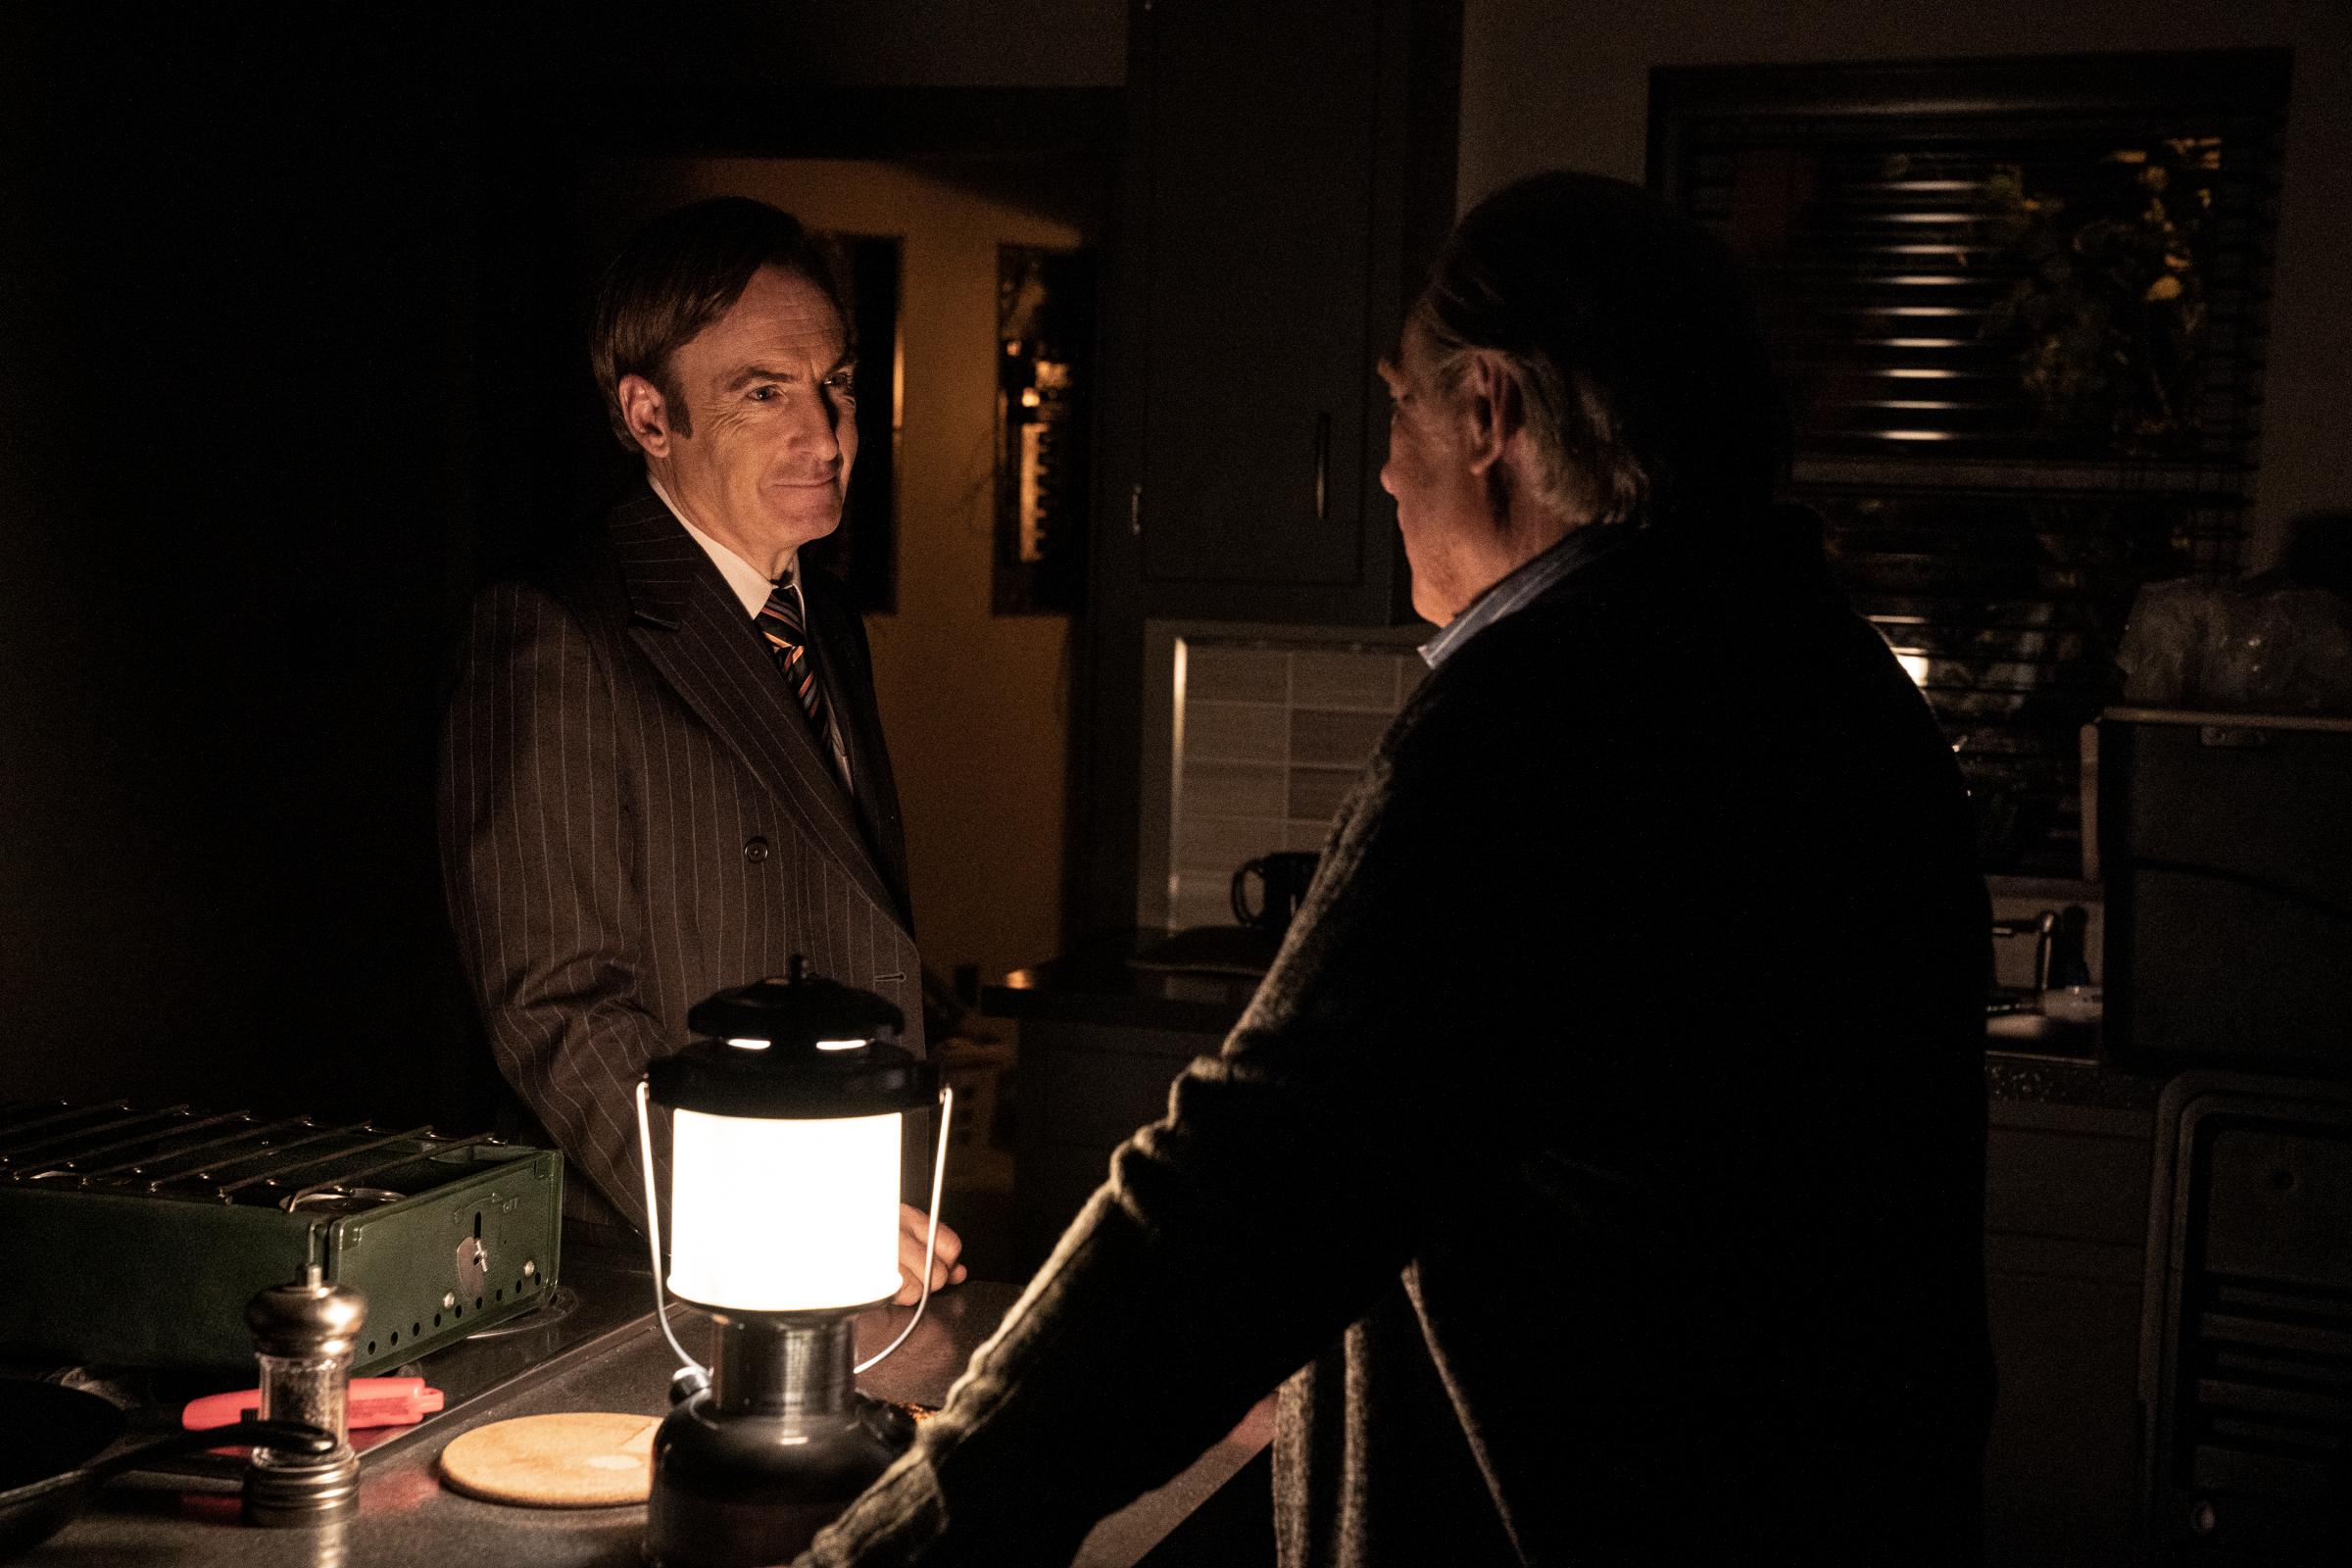 Bob Odenkirk as Jimmy McGill, Michael McKean as Chuck McGill - Better Call Saul _ Season 6, Episode 13 - Photo Credit: Greg Lewis/AMC/Sony Pictures Television